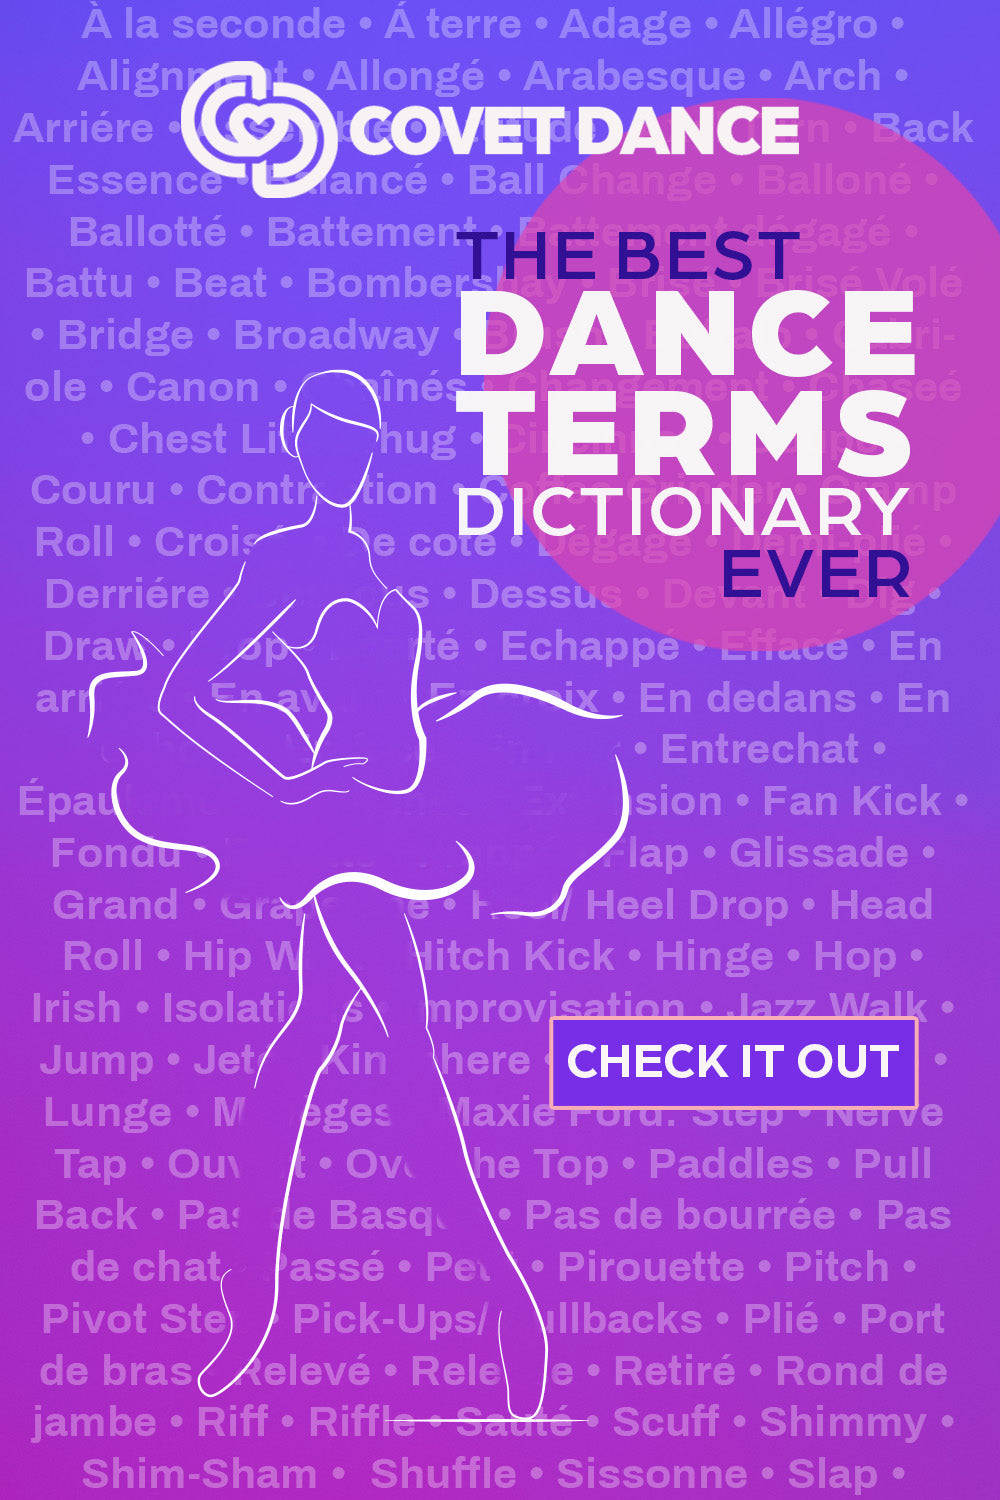 The Best Dance Terms Dictionary Ever